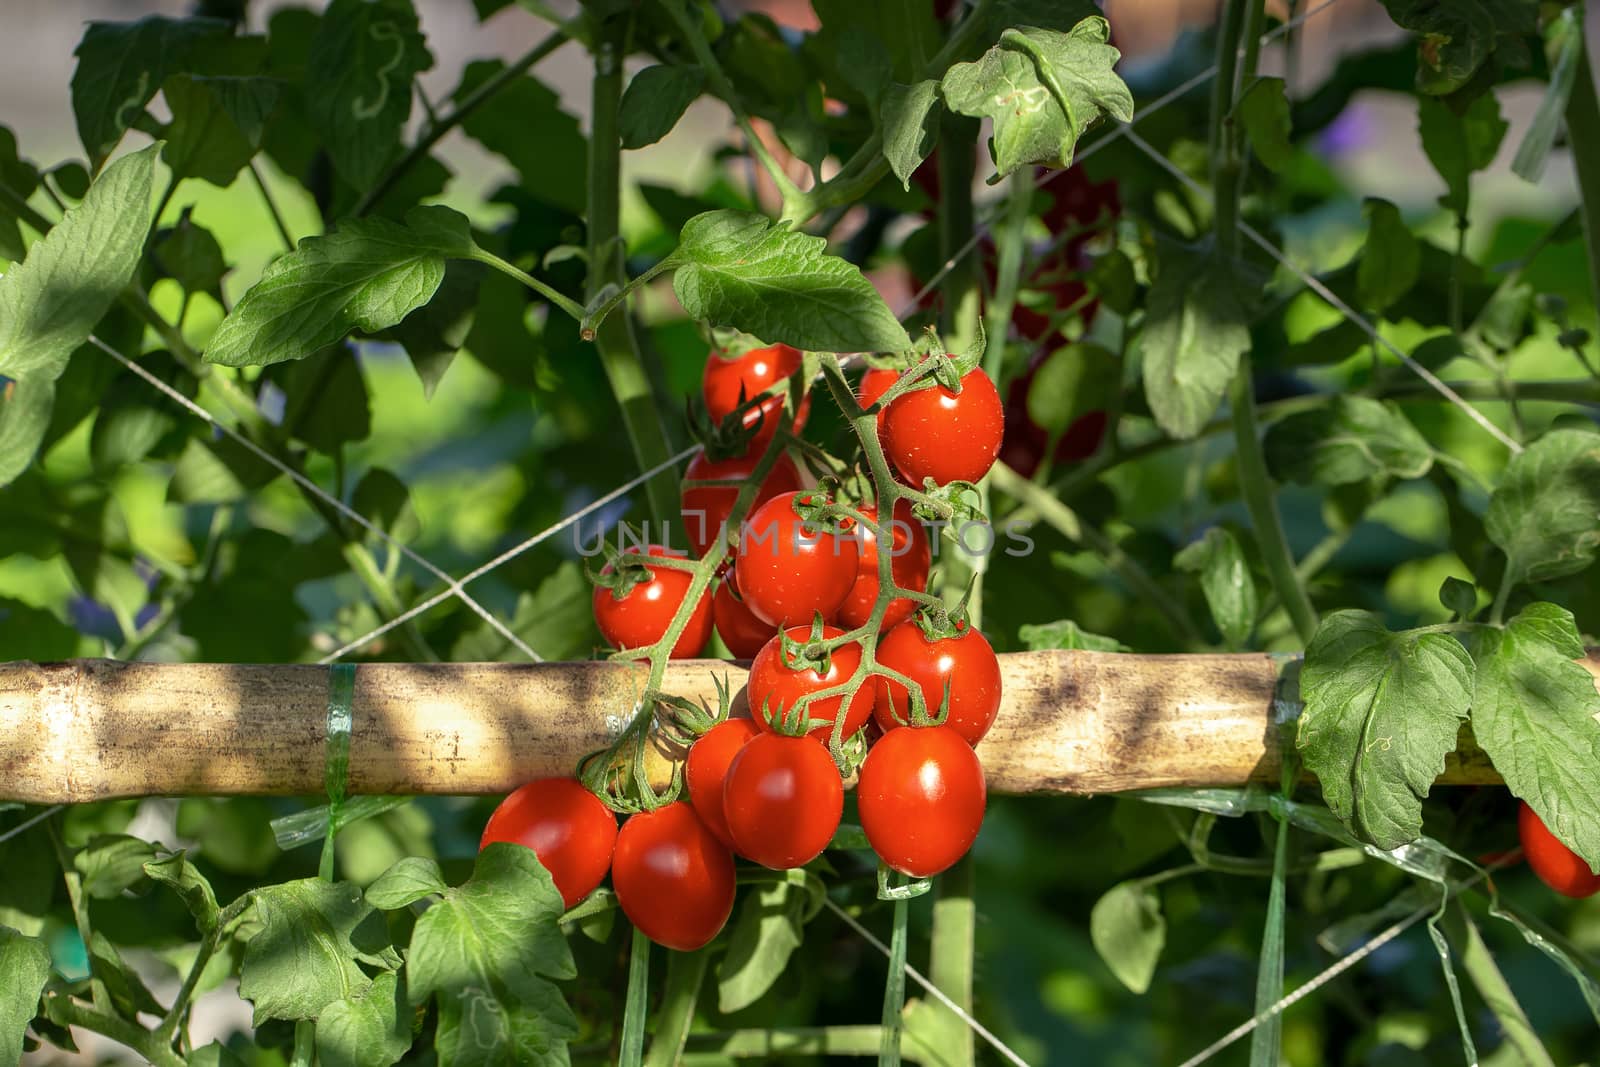 Ripe red tomatoes are hanging on the tomato tree in the agricultural farm.